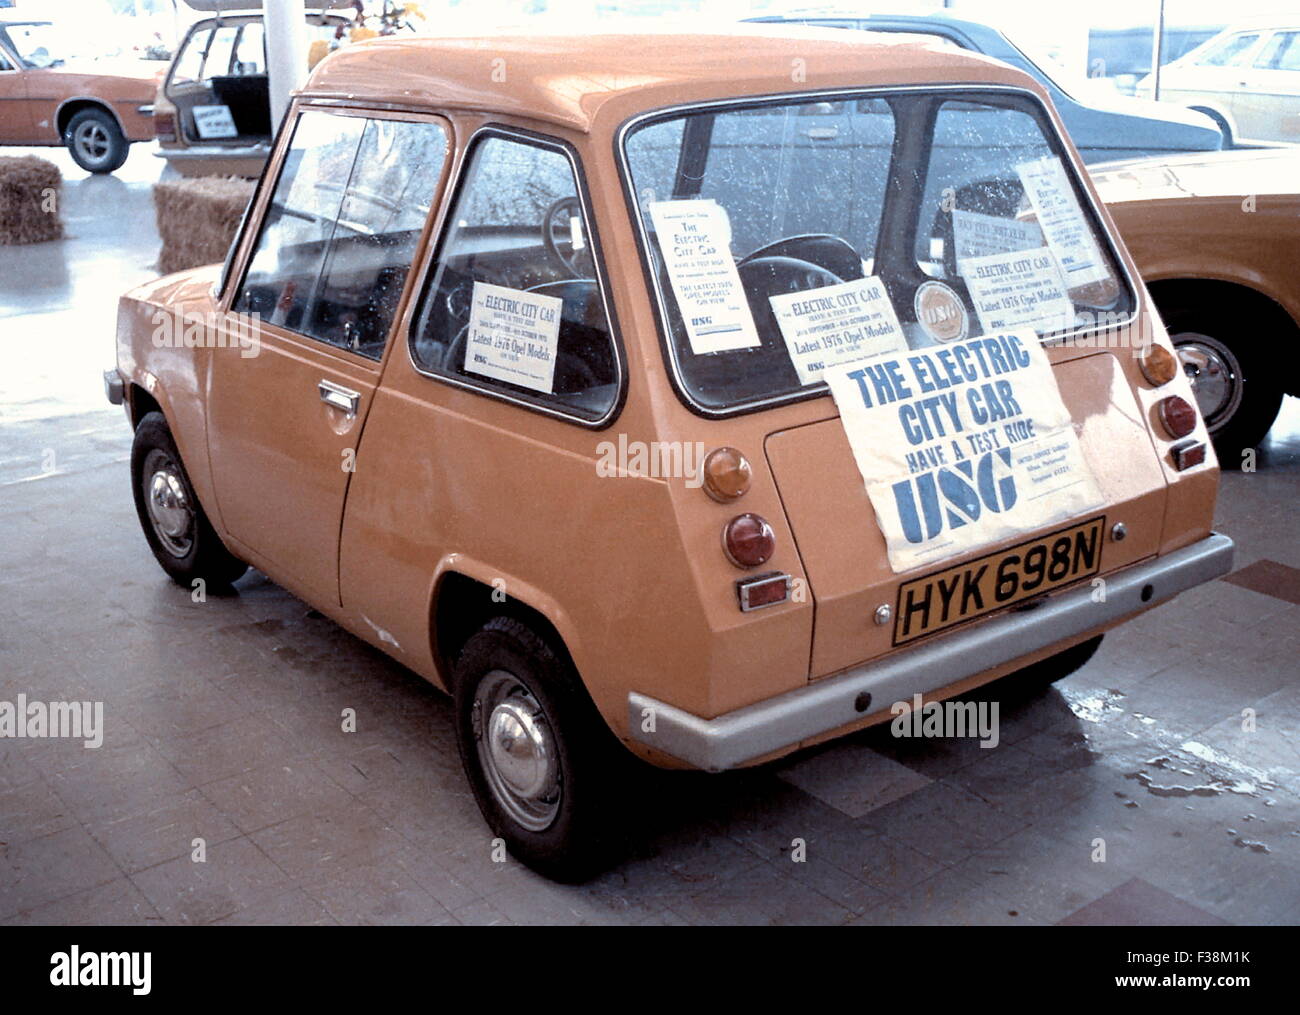 AJAXNETPHOTO. 1976. PORTSMOUTH, ENGLAND. - ELECTRIC CAR - ON DISPLAY IN A CITY SHOWROOM, THE OPEL ELECTRIC CITY CAR. PHOTO:JONATHAN EASTLAND/AJAX REF:3 002 Stock Photo